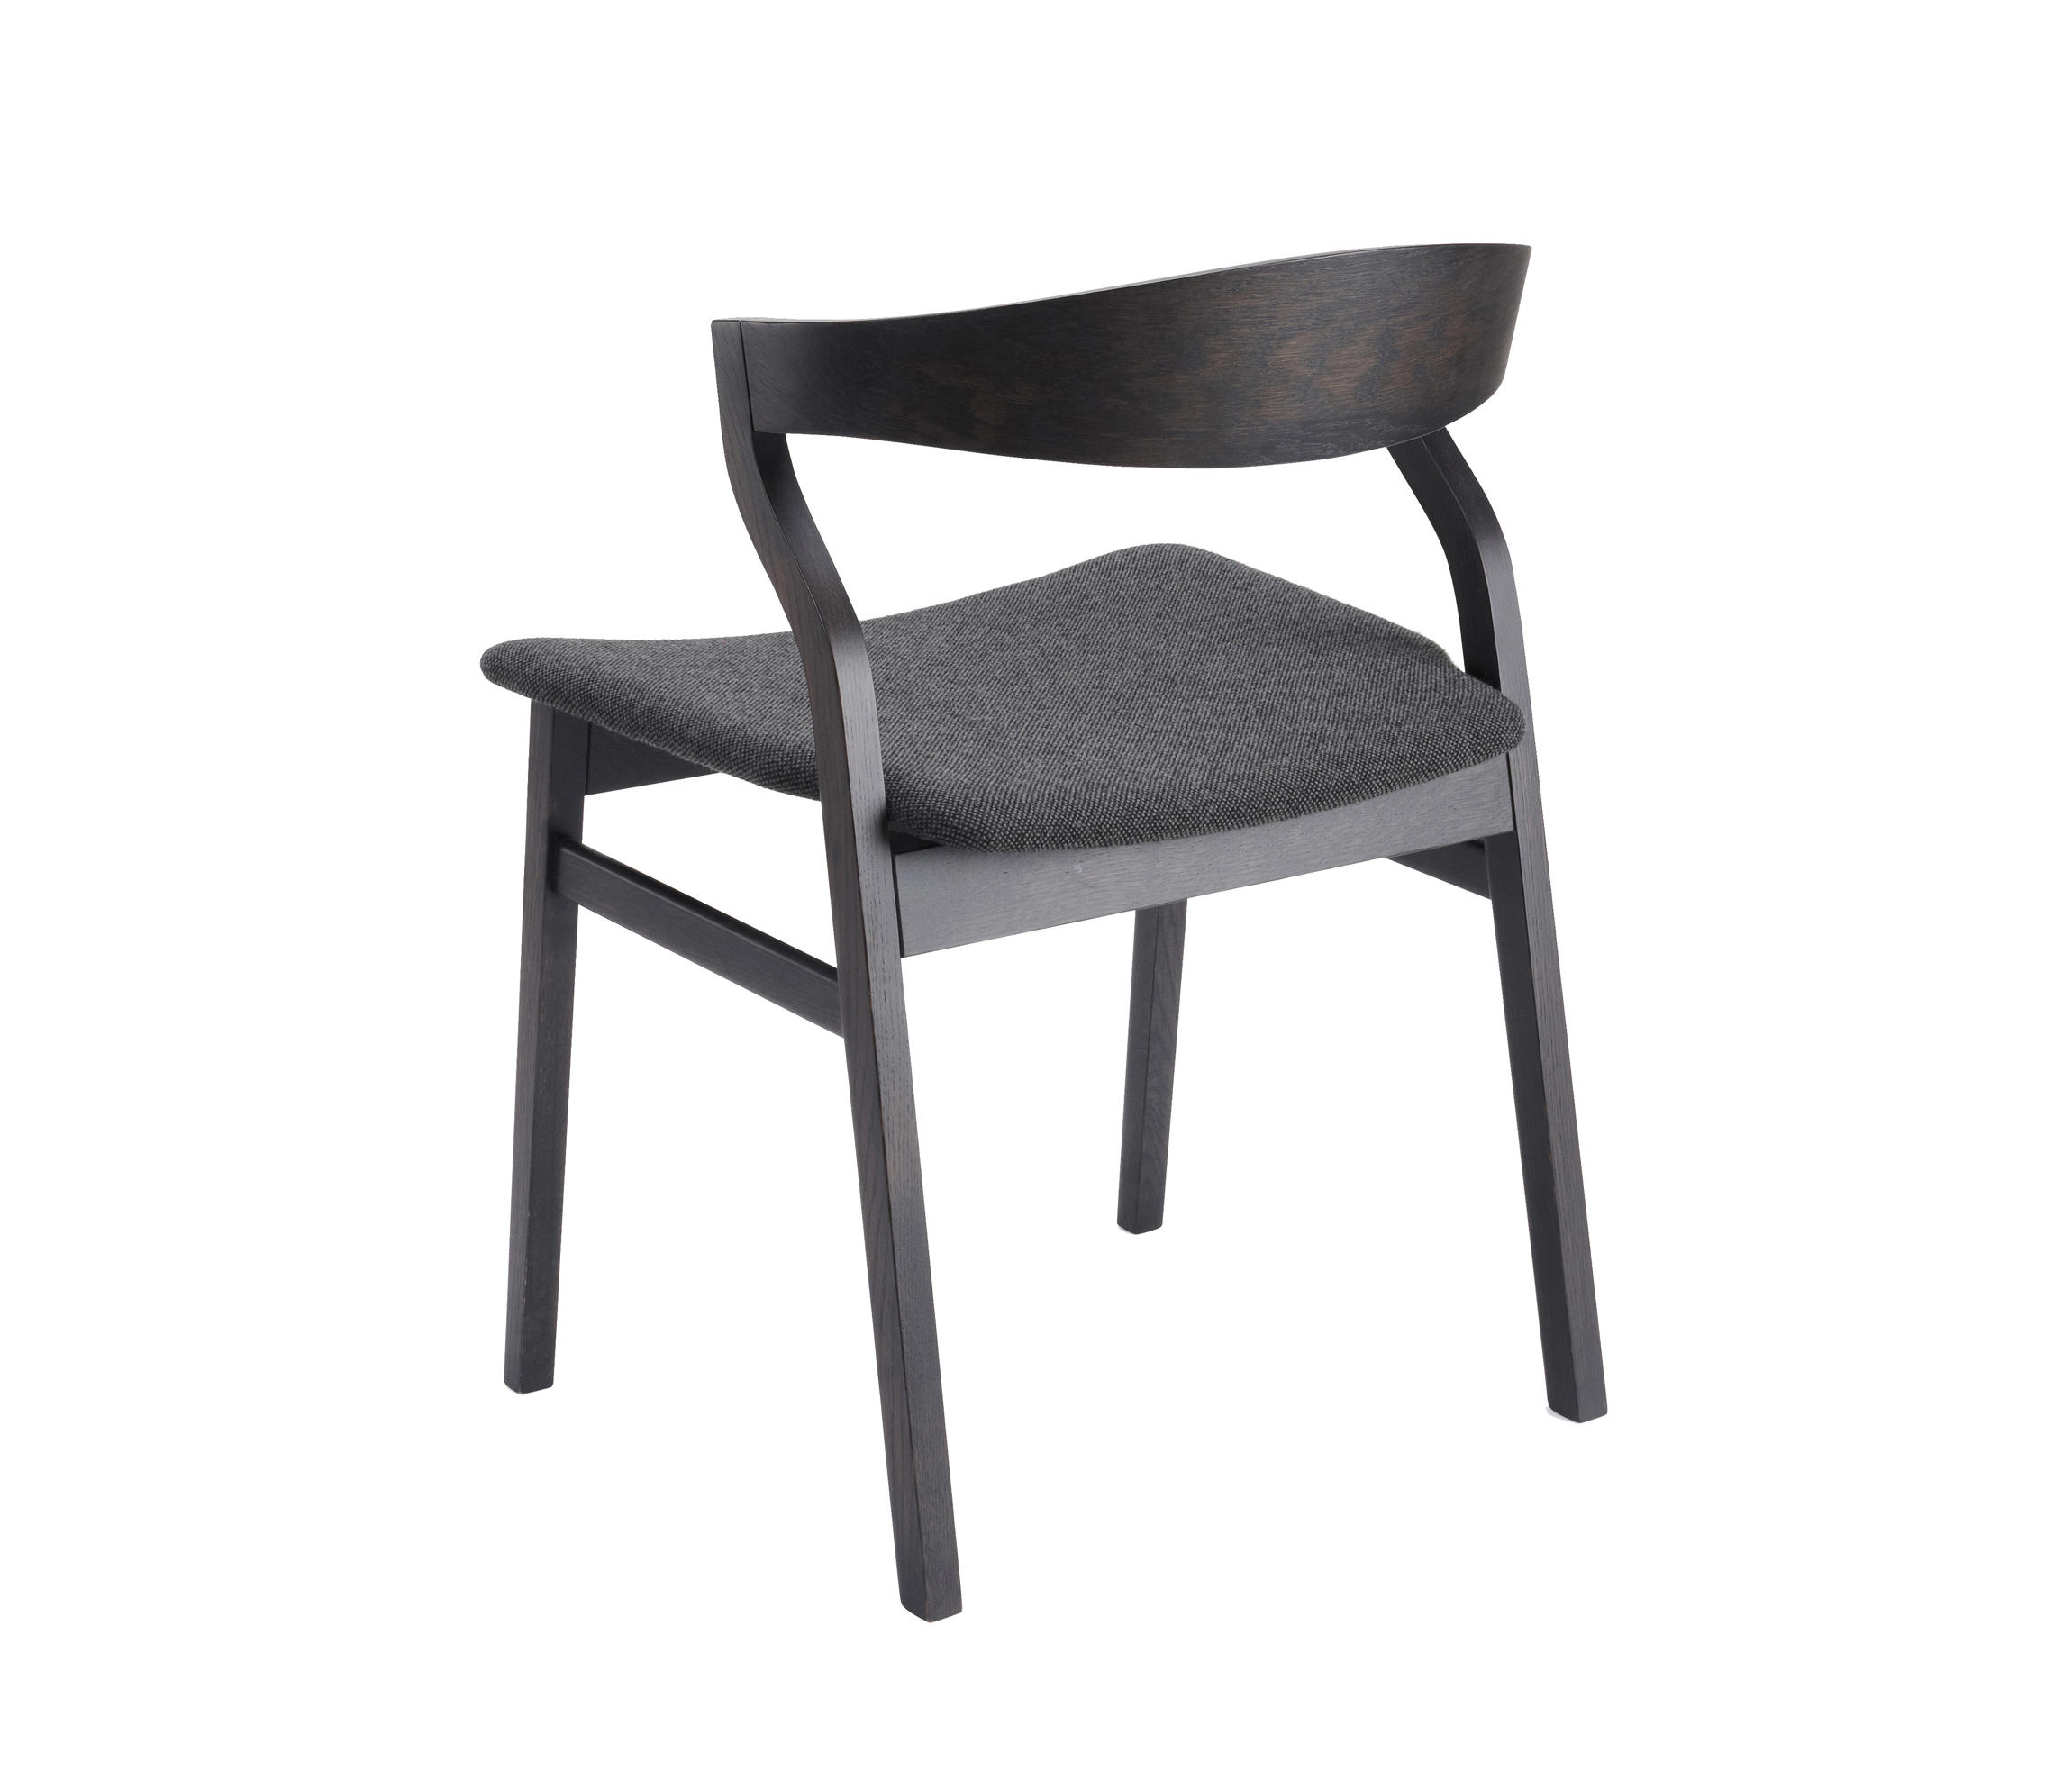 KALEA CHAIR - Chairs from Bedont | Architonic